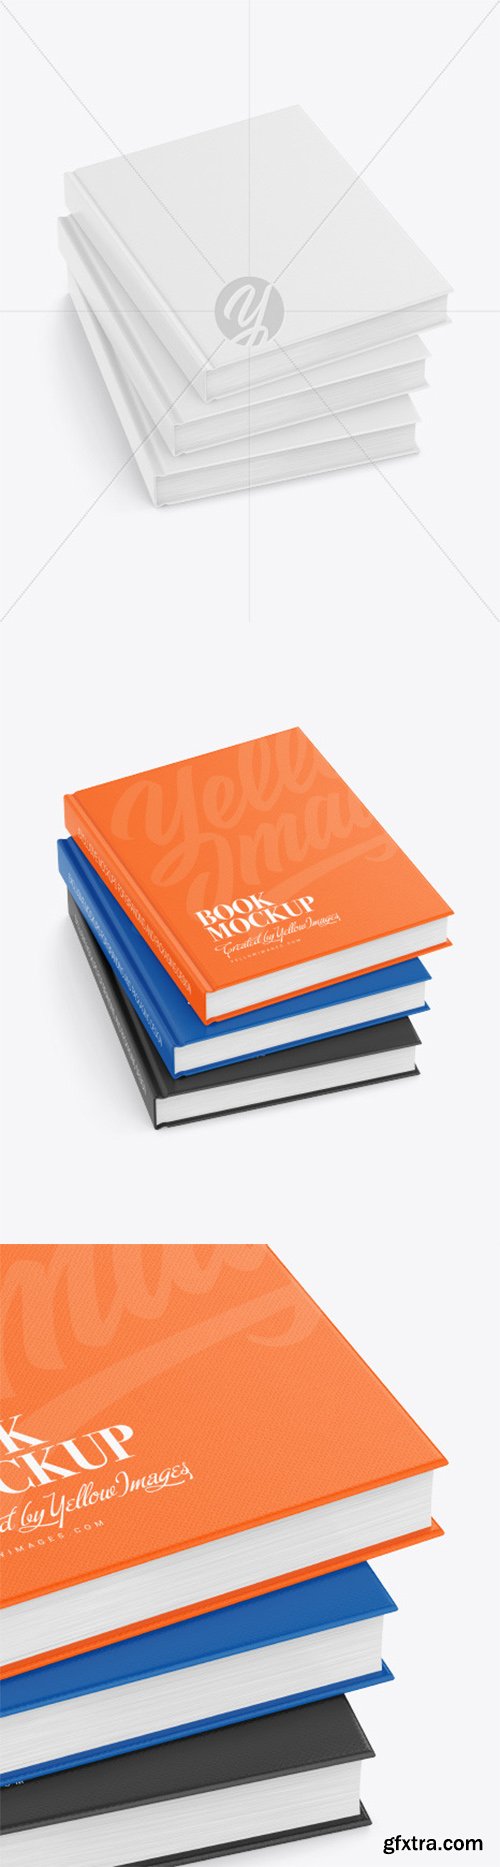 Hardcover Books w/ Fabric Cover Mockup 64829